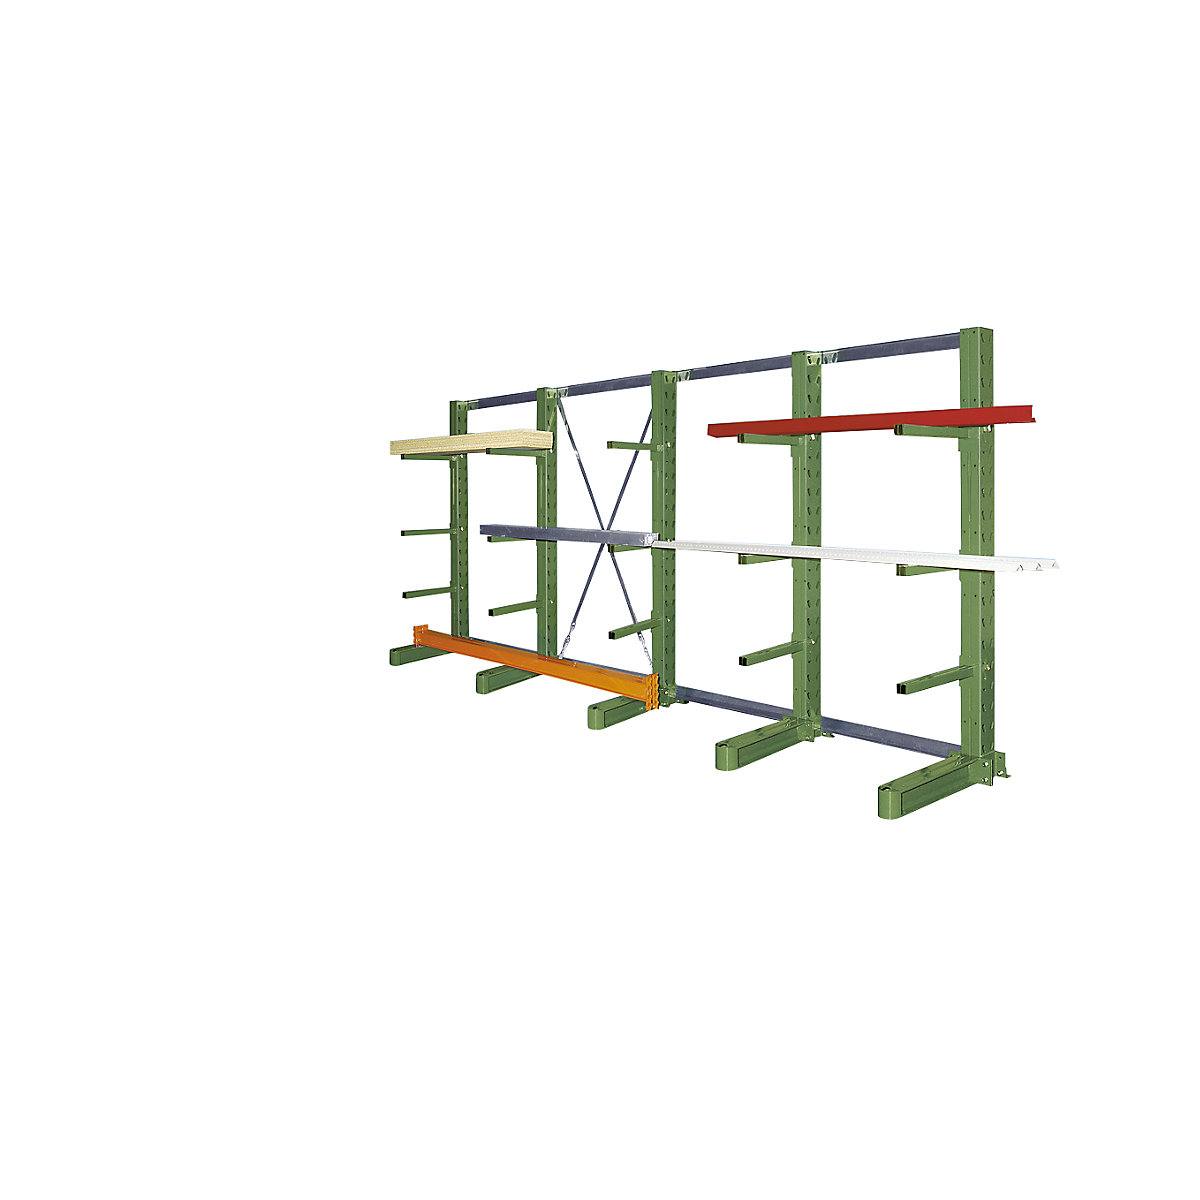 Complete cantilever racking unit – eurokraft pro, stand height 2700 mm, length 4100 mm, depth 400 mm, single sided, green-1